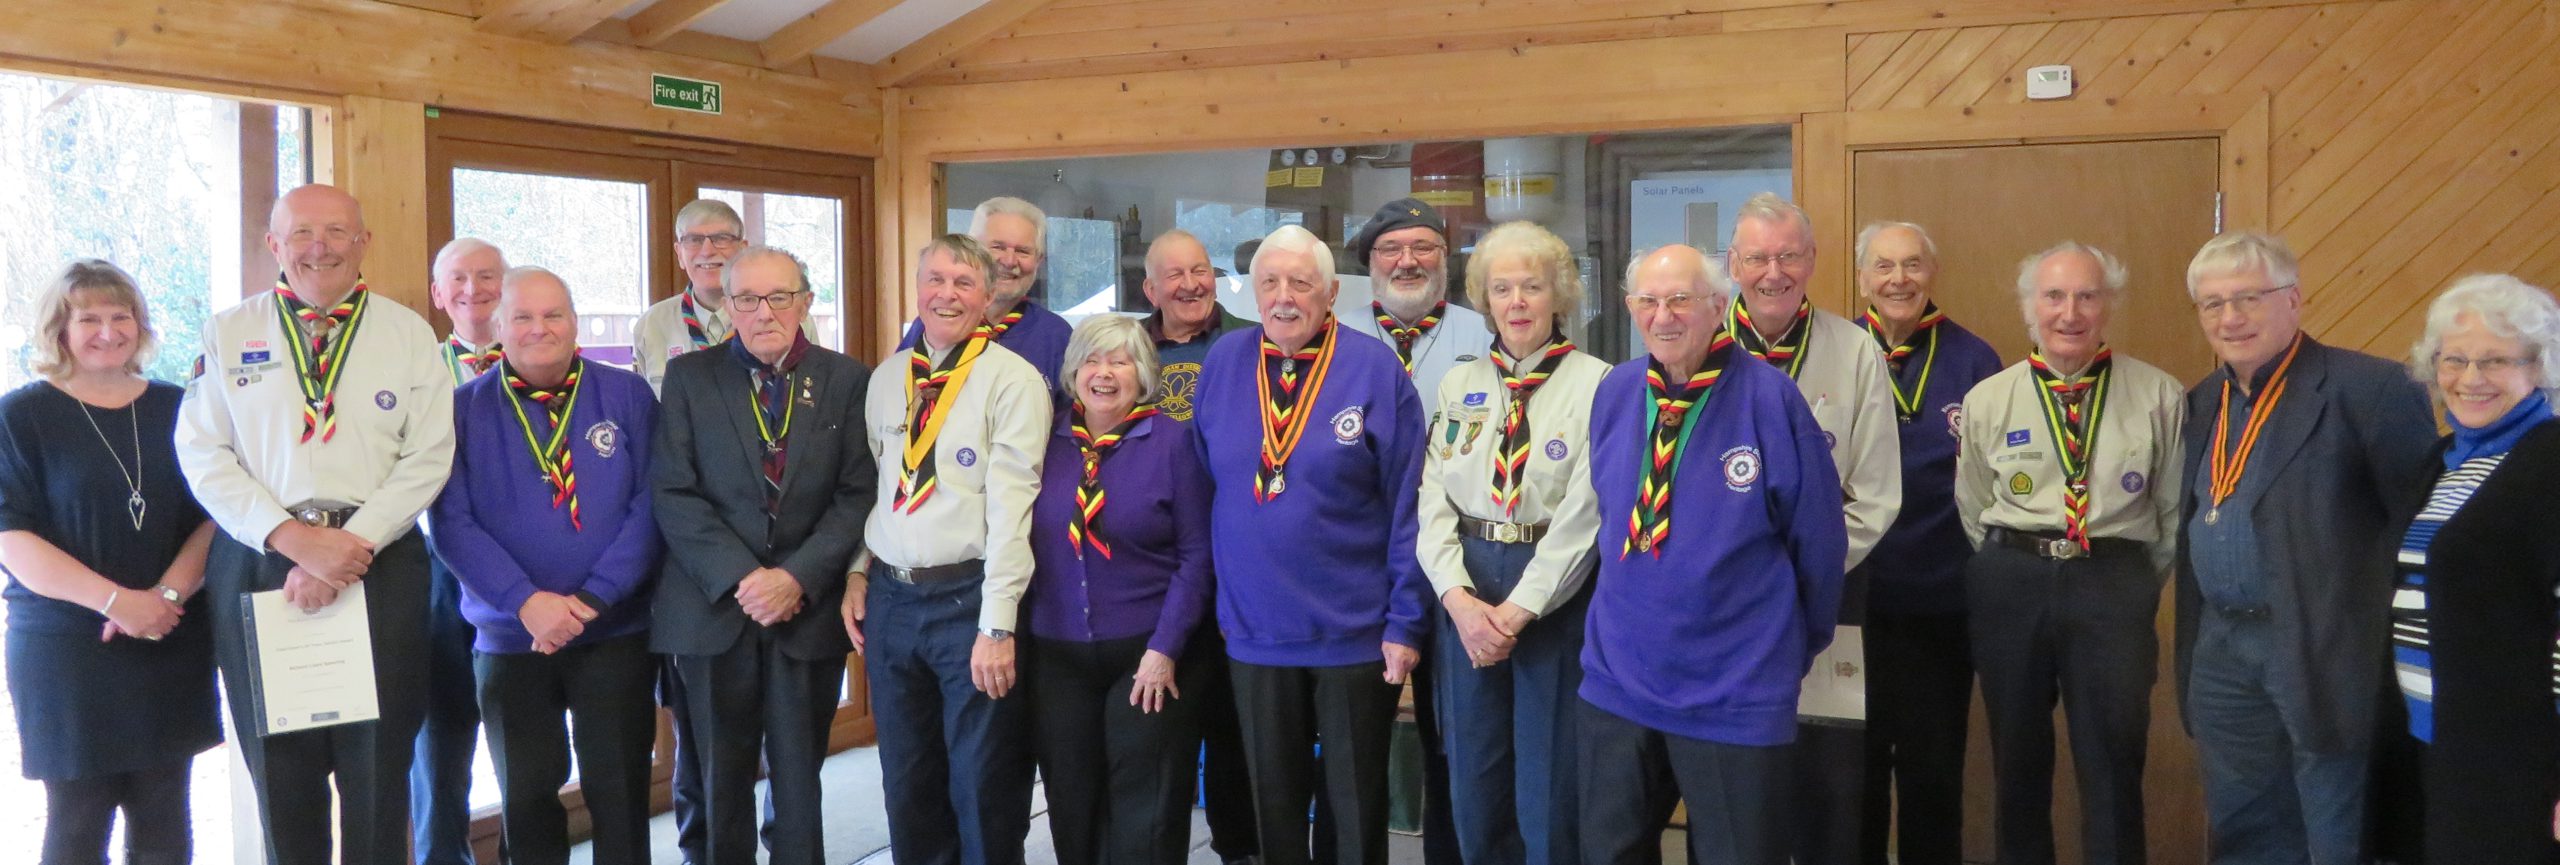 A group photo of Hampshire Scout Heritage members